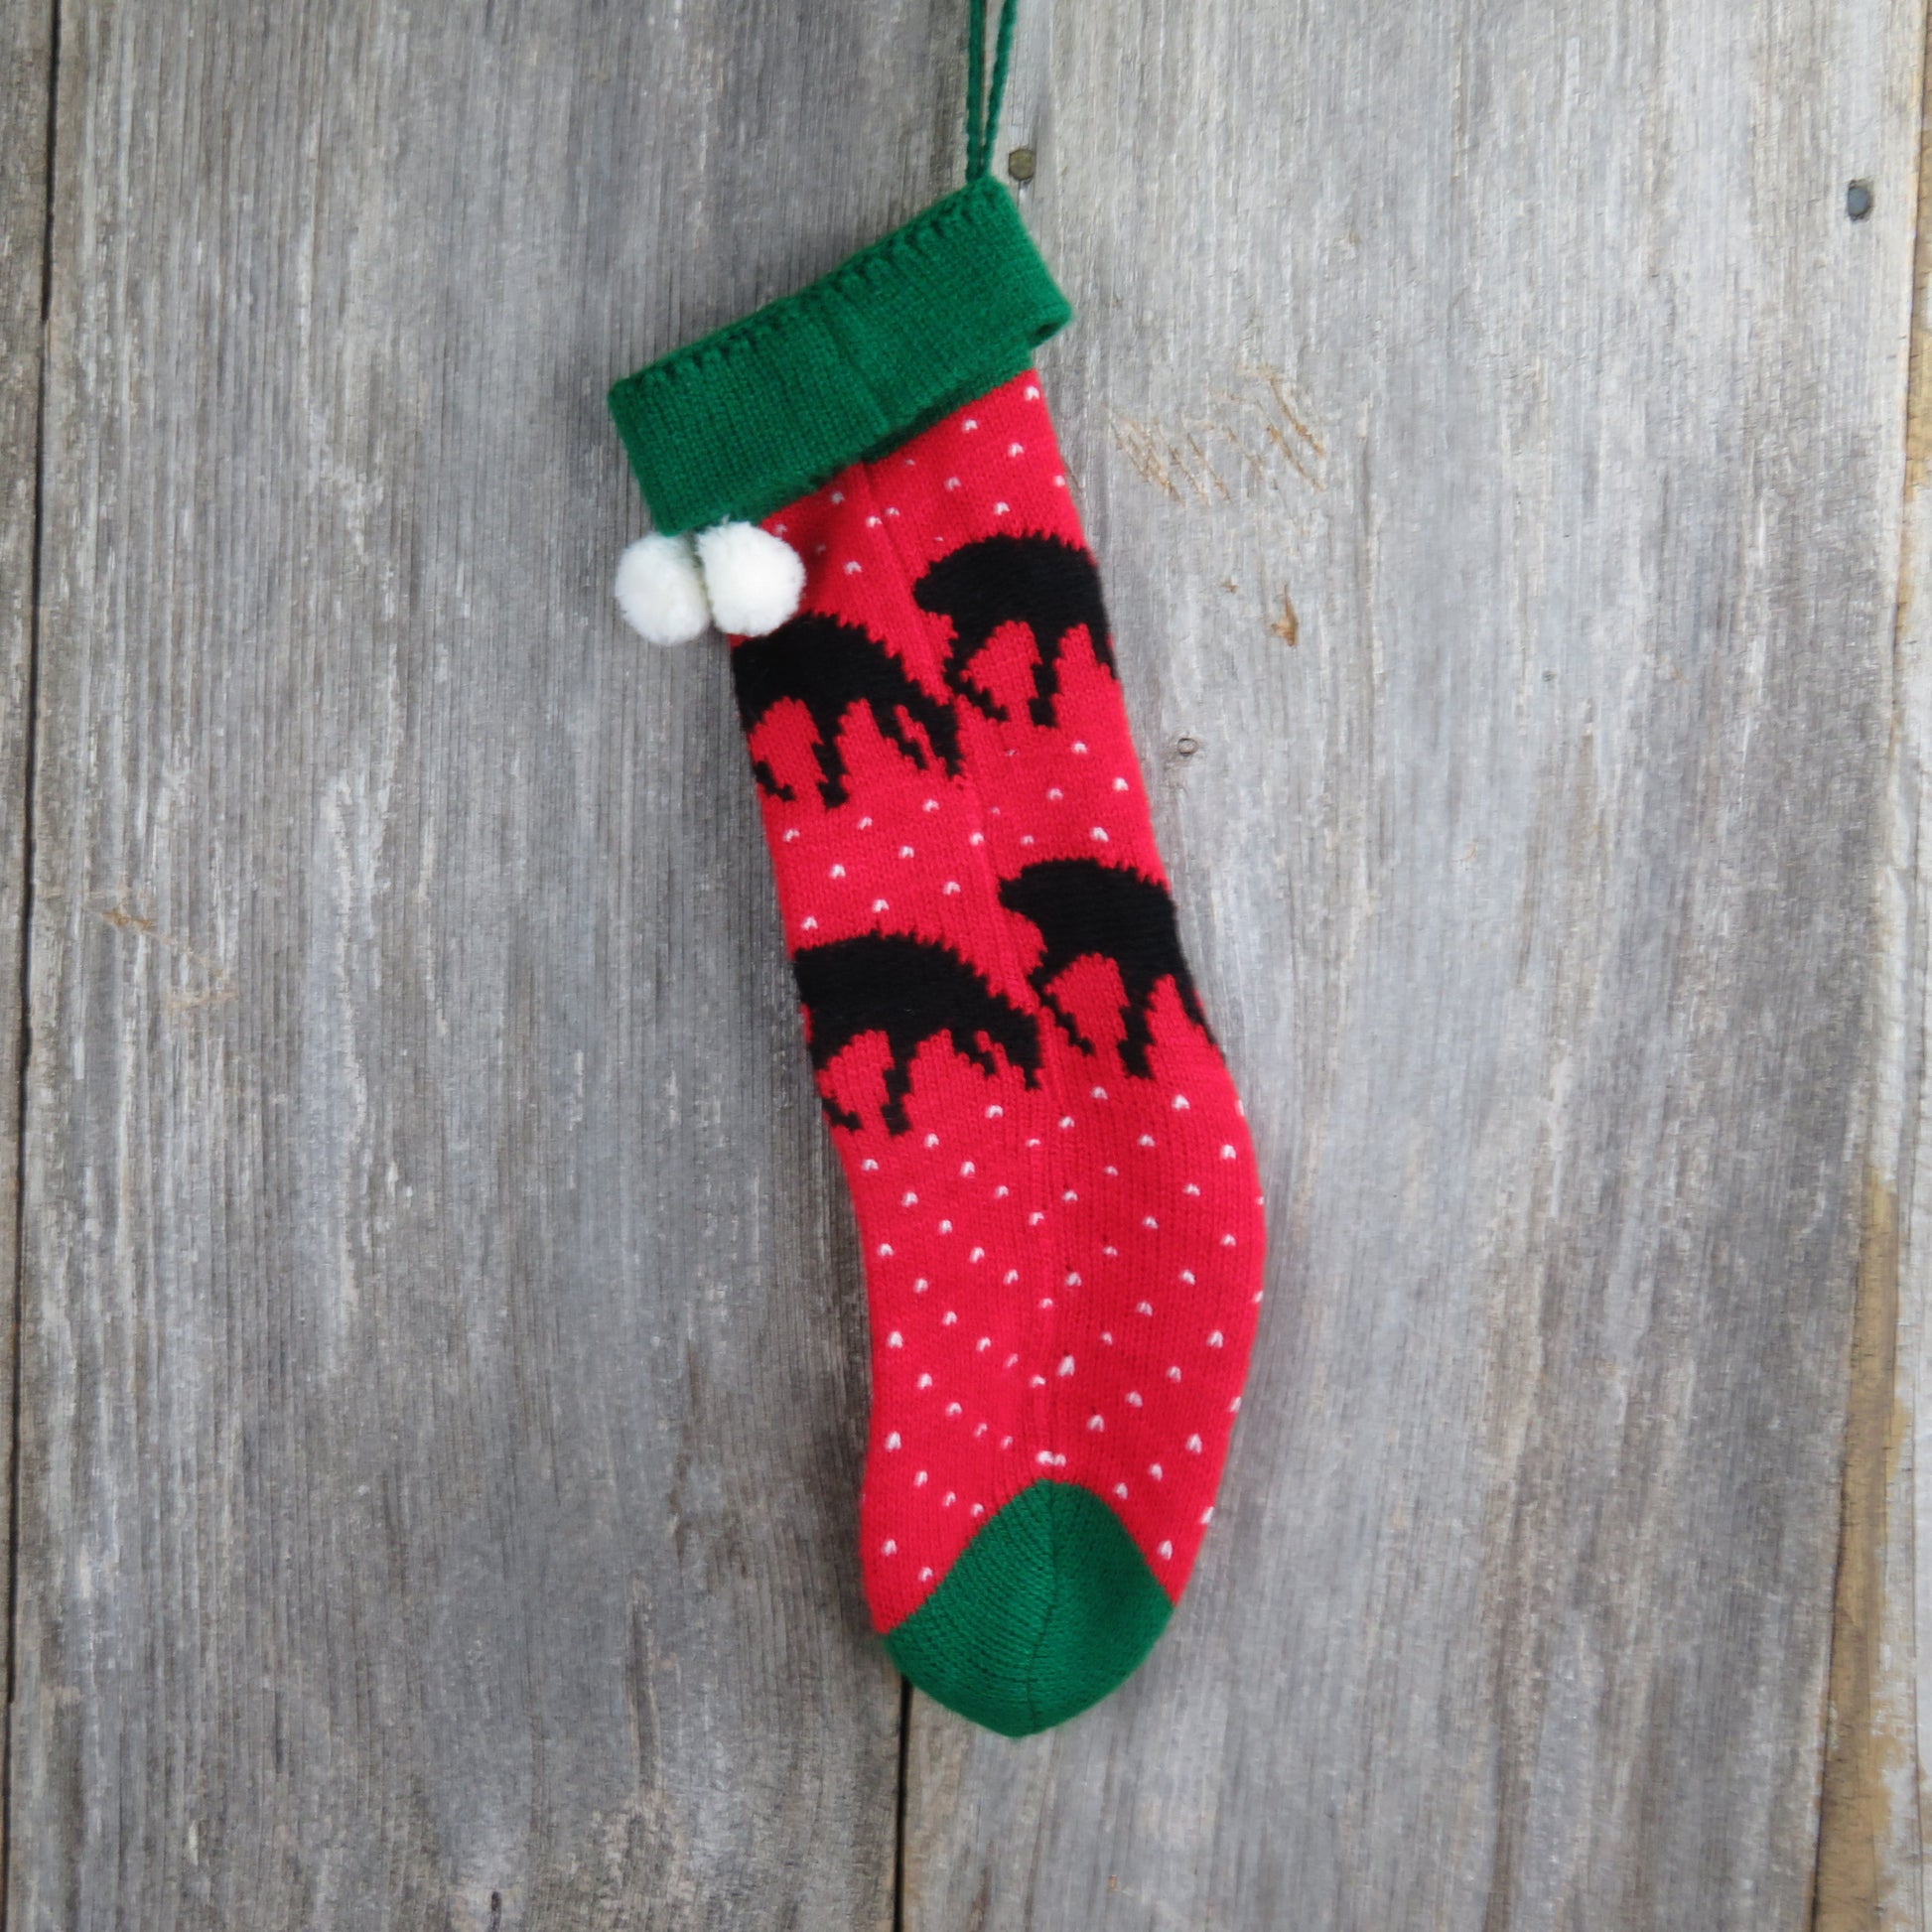 Vintage Reindeer Knit Christmas Stocking Deer Knitted Black  Red Green White - At Grandma's Table